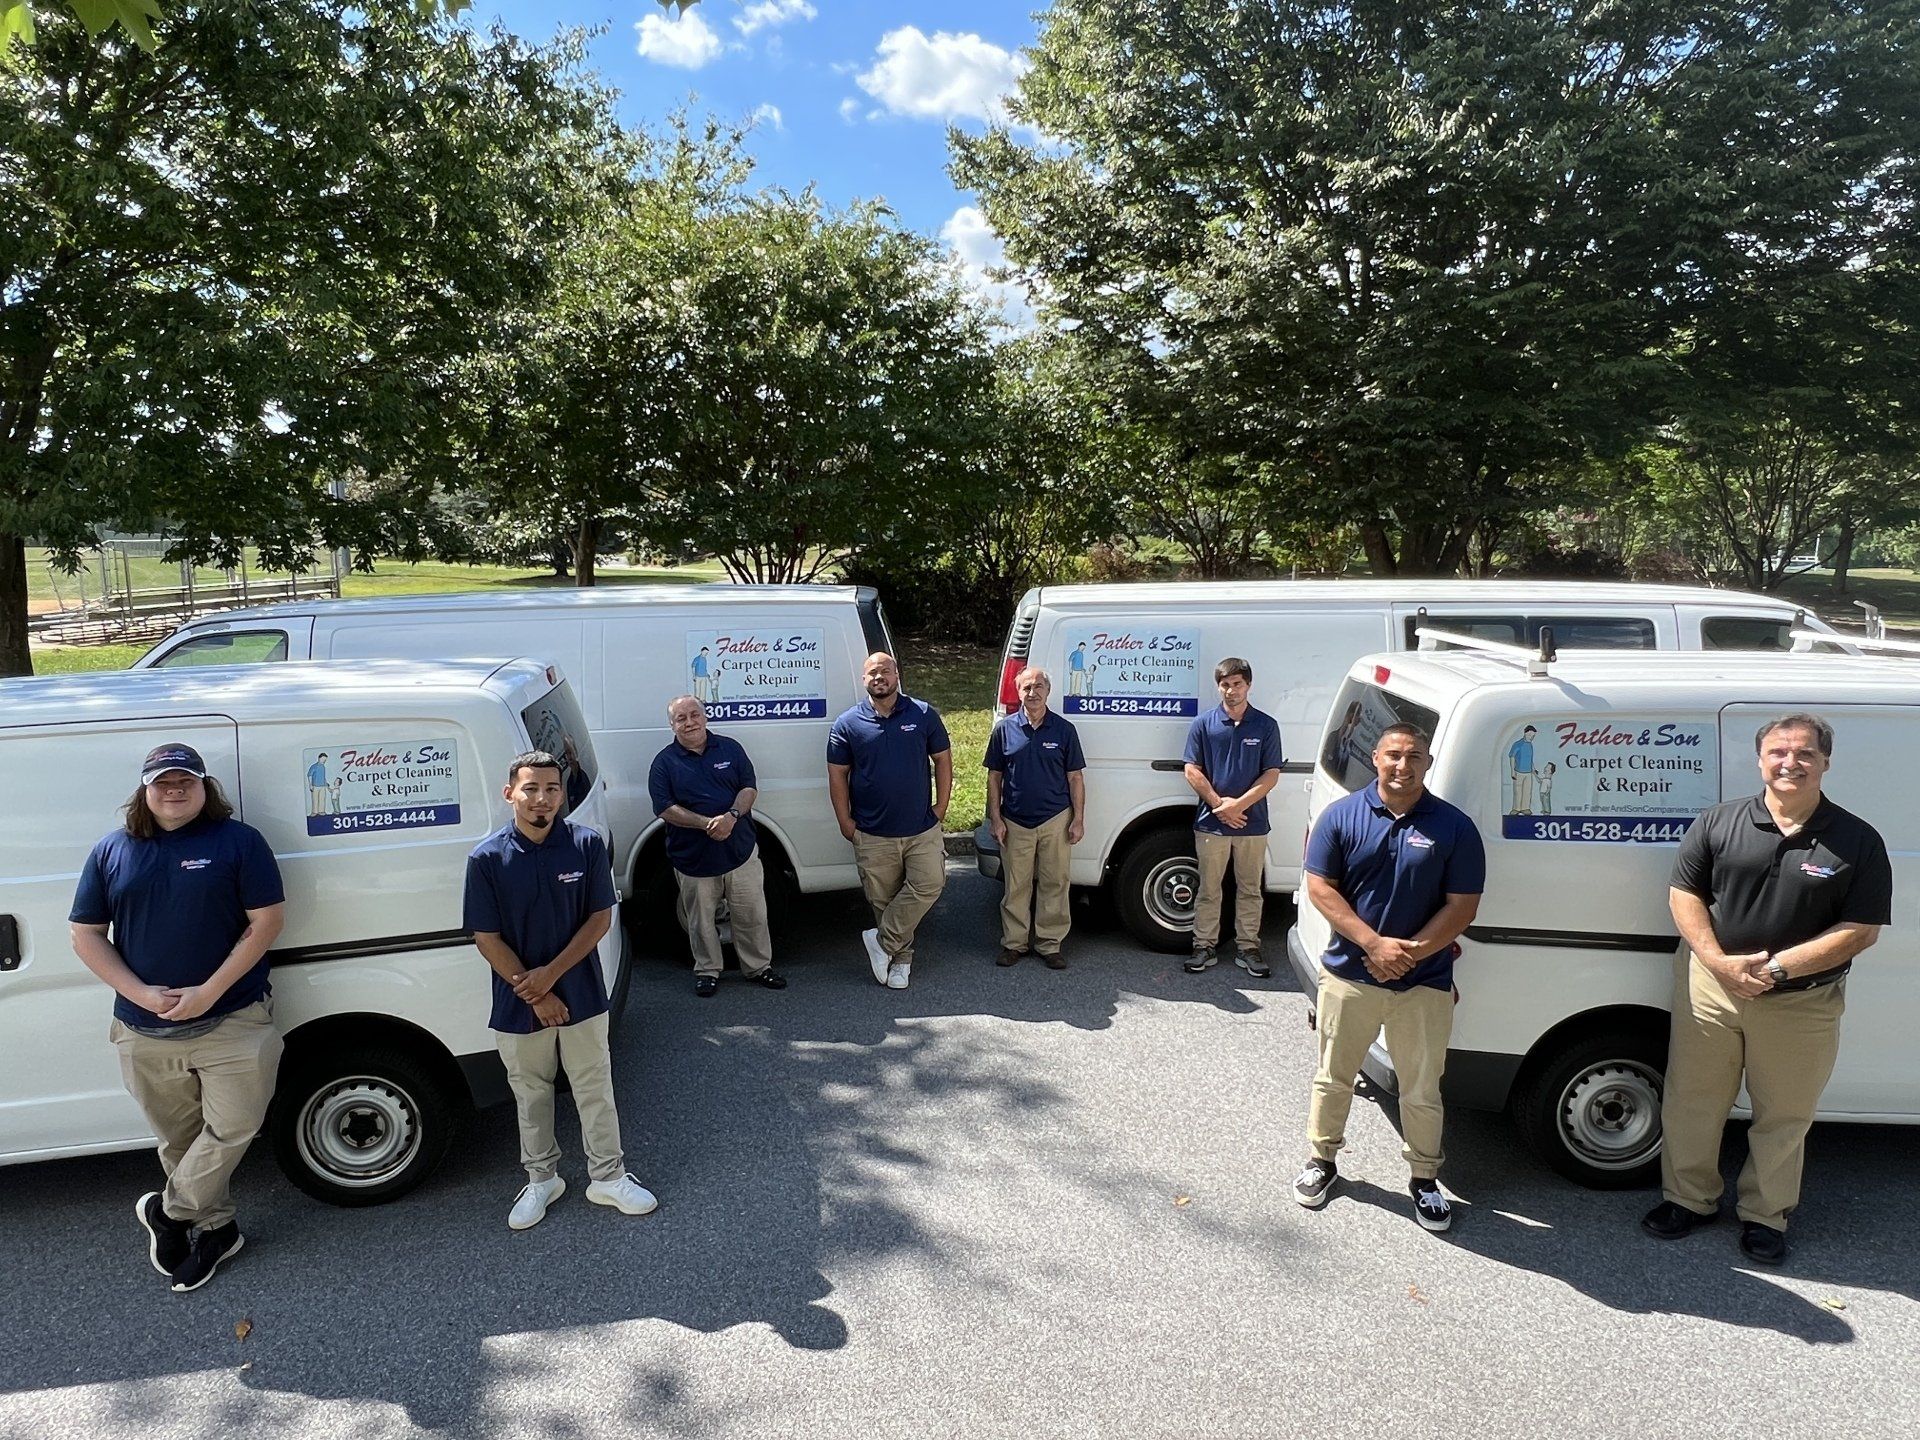 Employees — Germantown, MD — Father & Son Carpet Cleaning & Repair